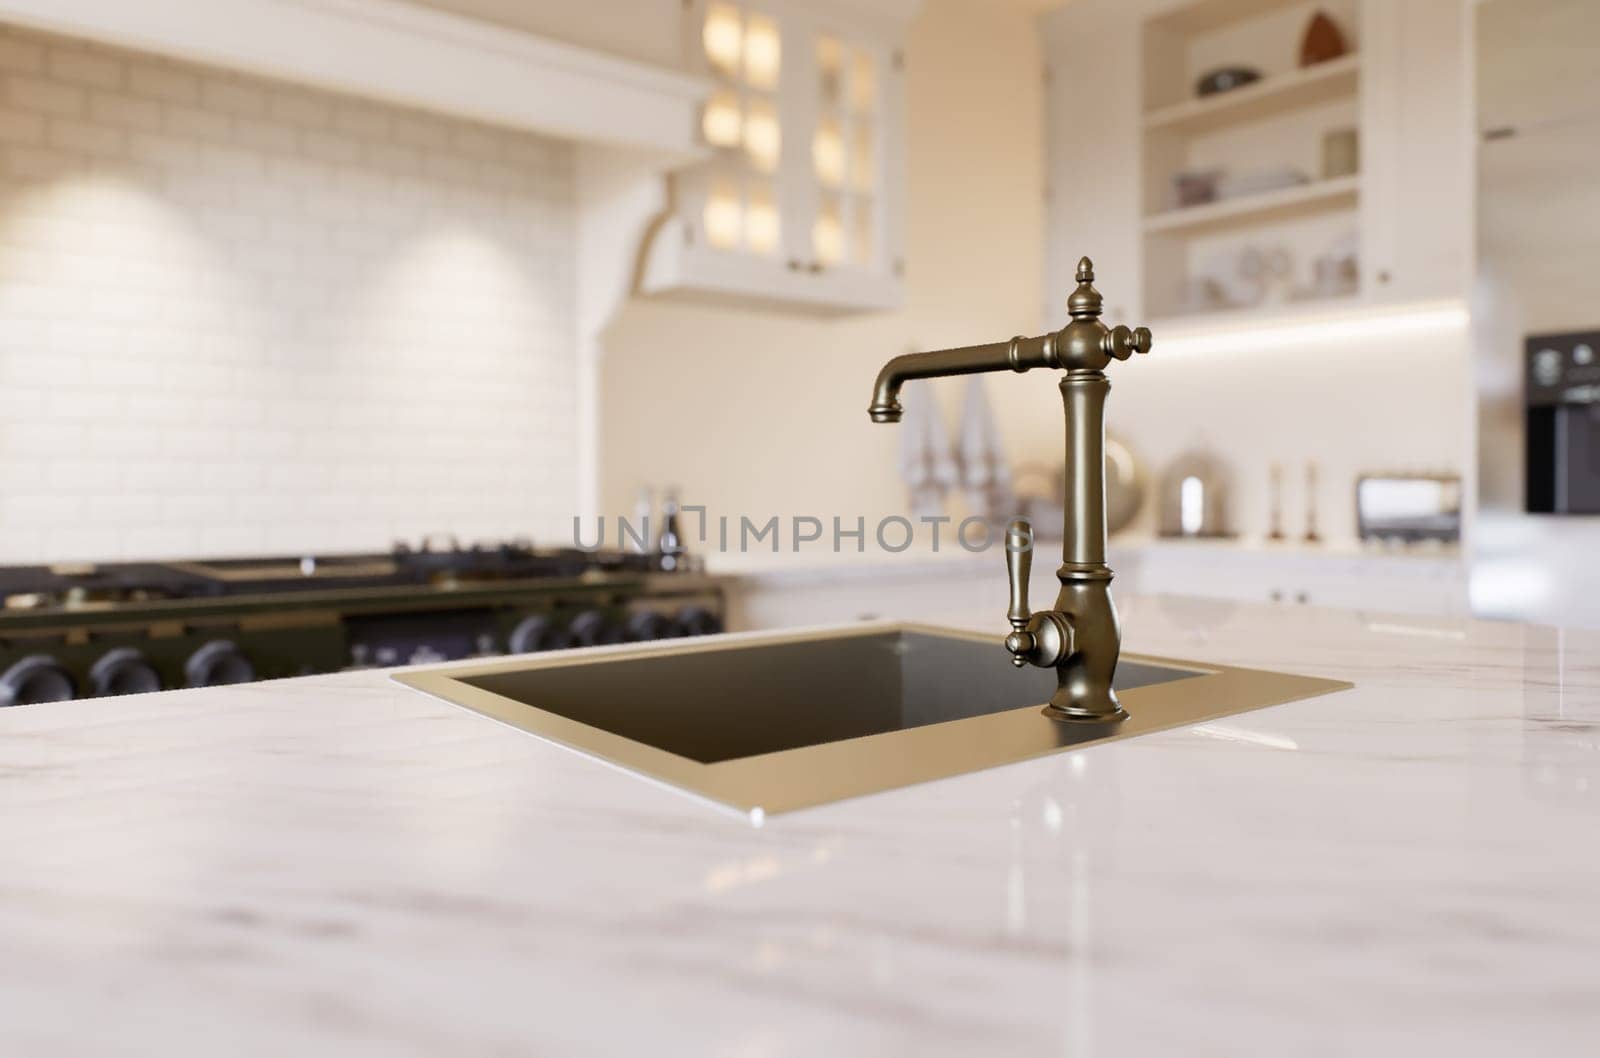 Kitchen with marble countertops and blurred kitchen background to display products on the surface. Kitchen interior with household appliances and utensils. 3D rendering